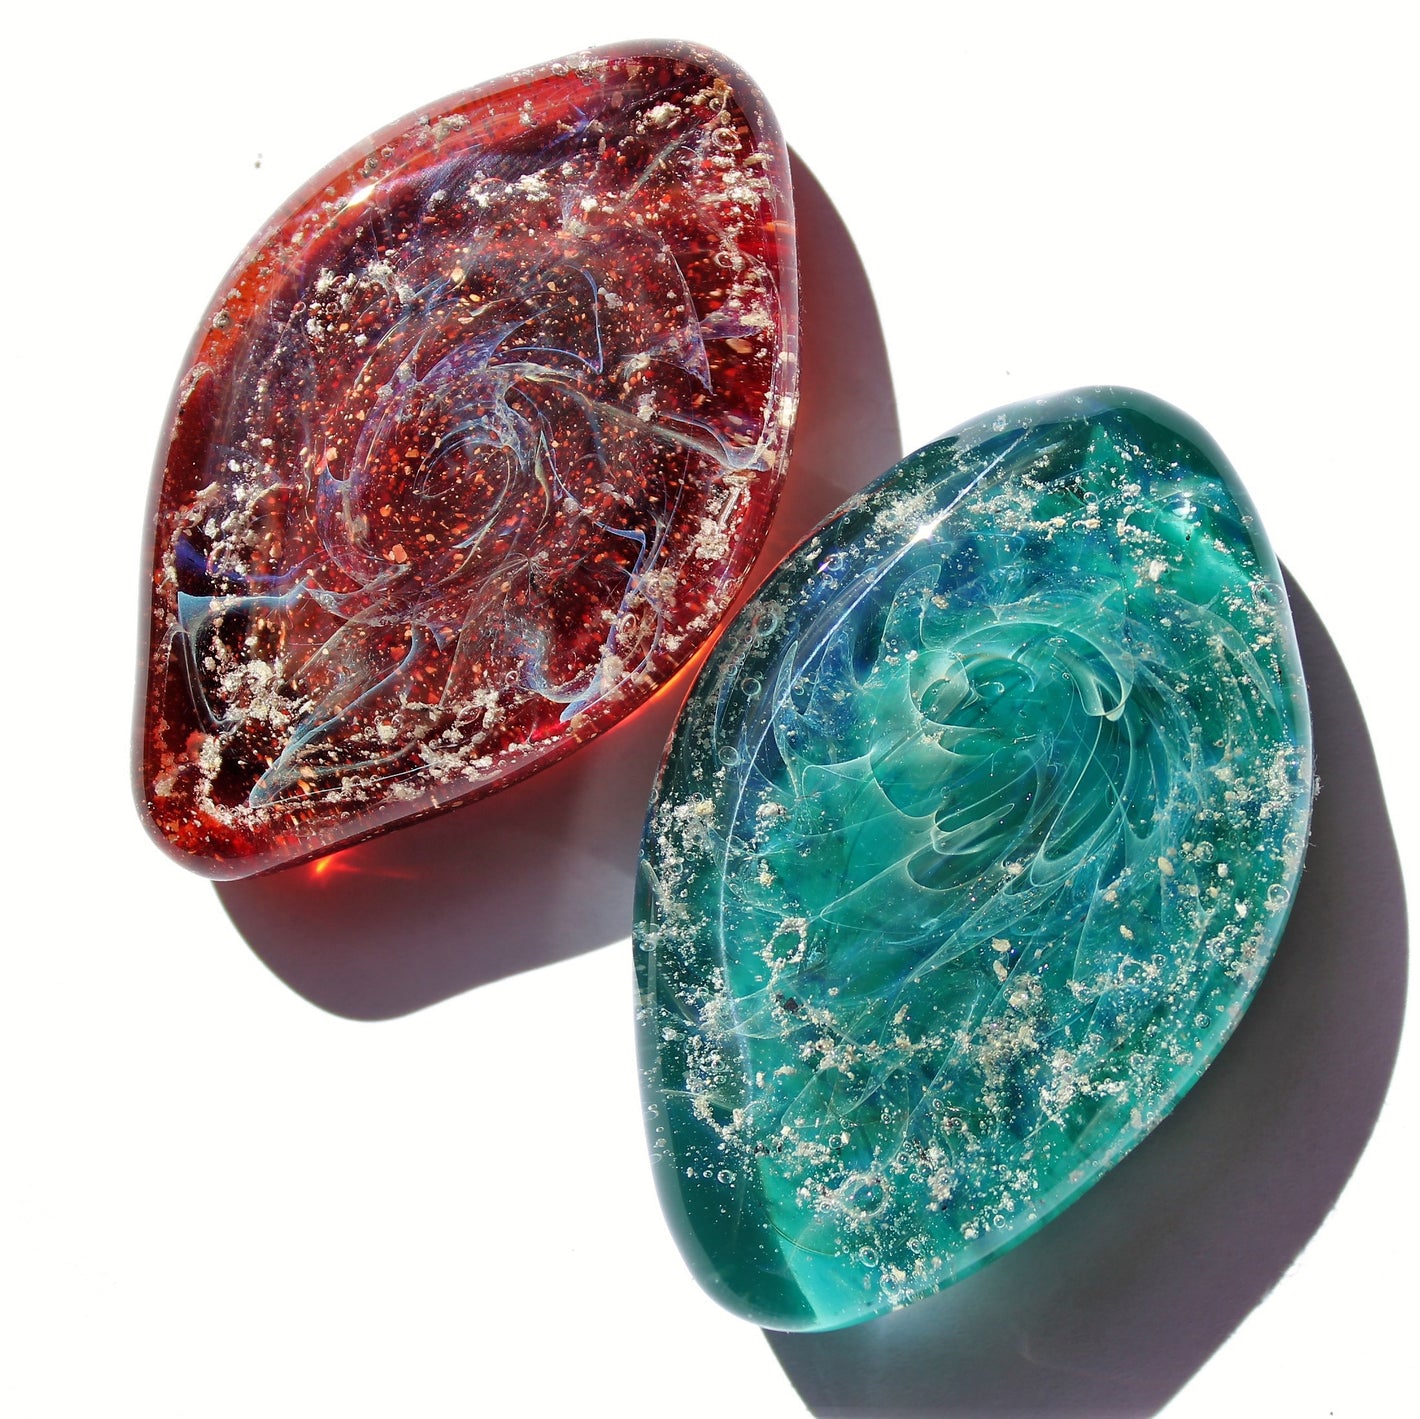 Glass cremation touchstones with infused ashes in Red Brick and Turquoise colors made by DragonFire Glass